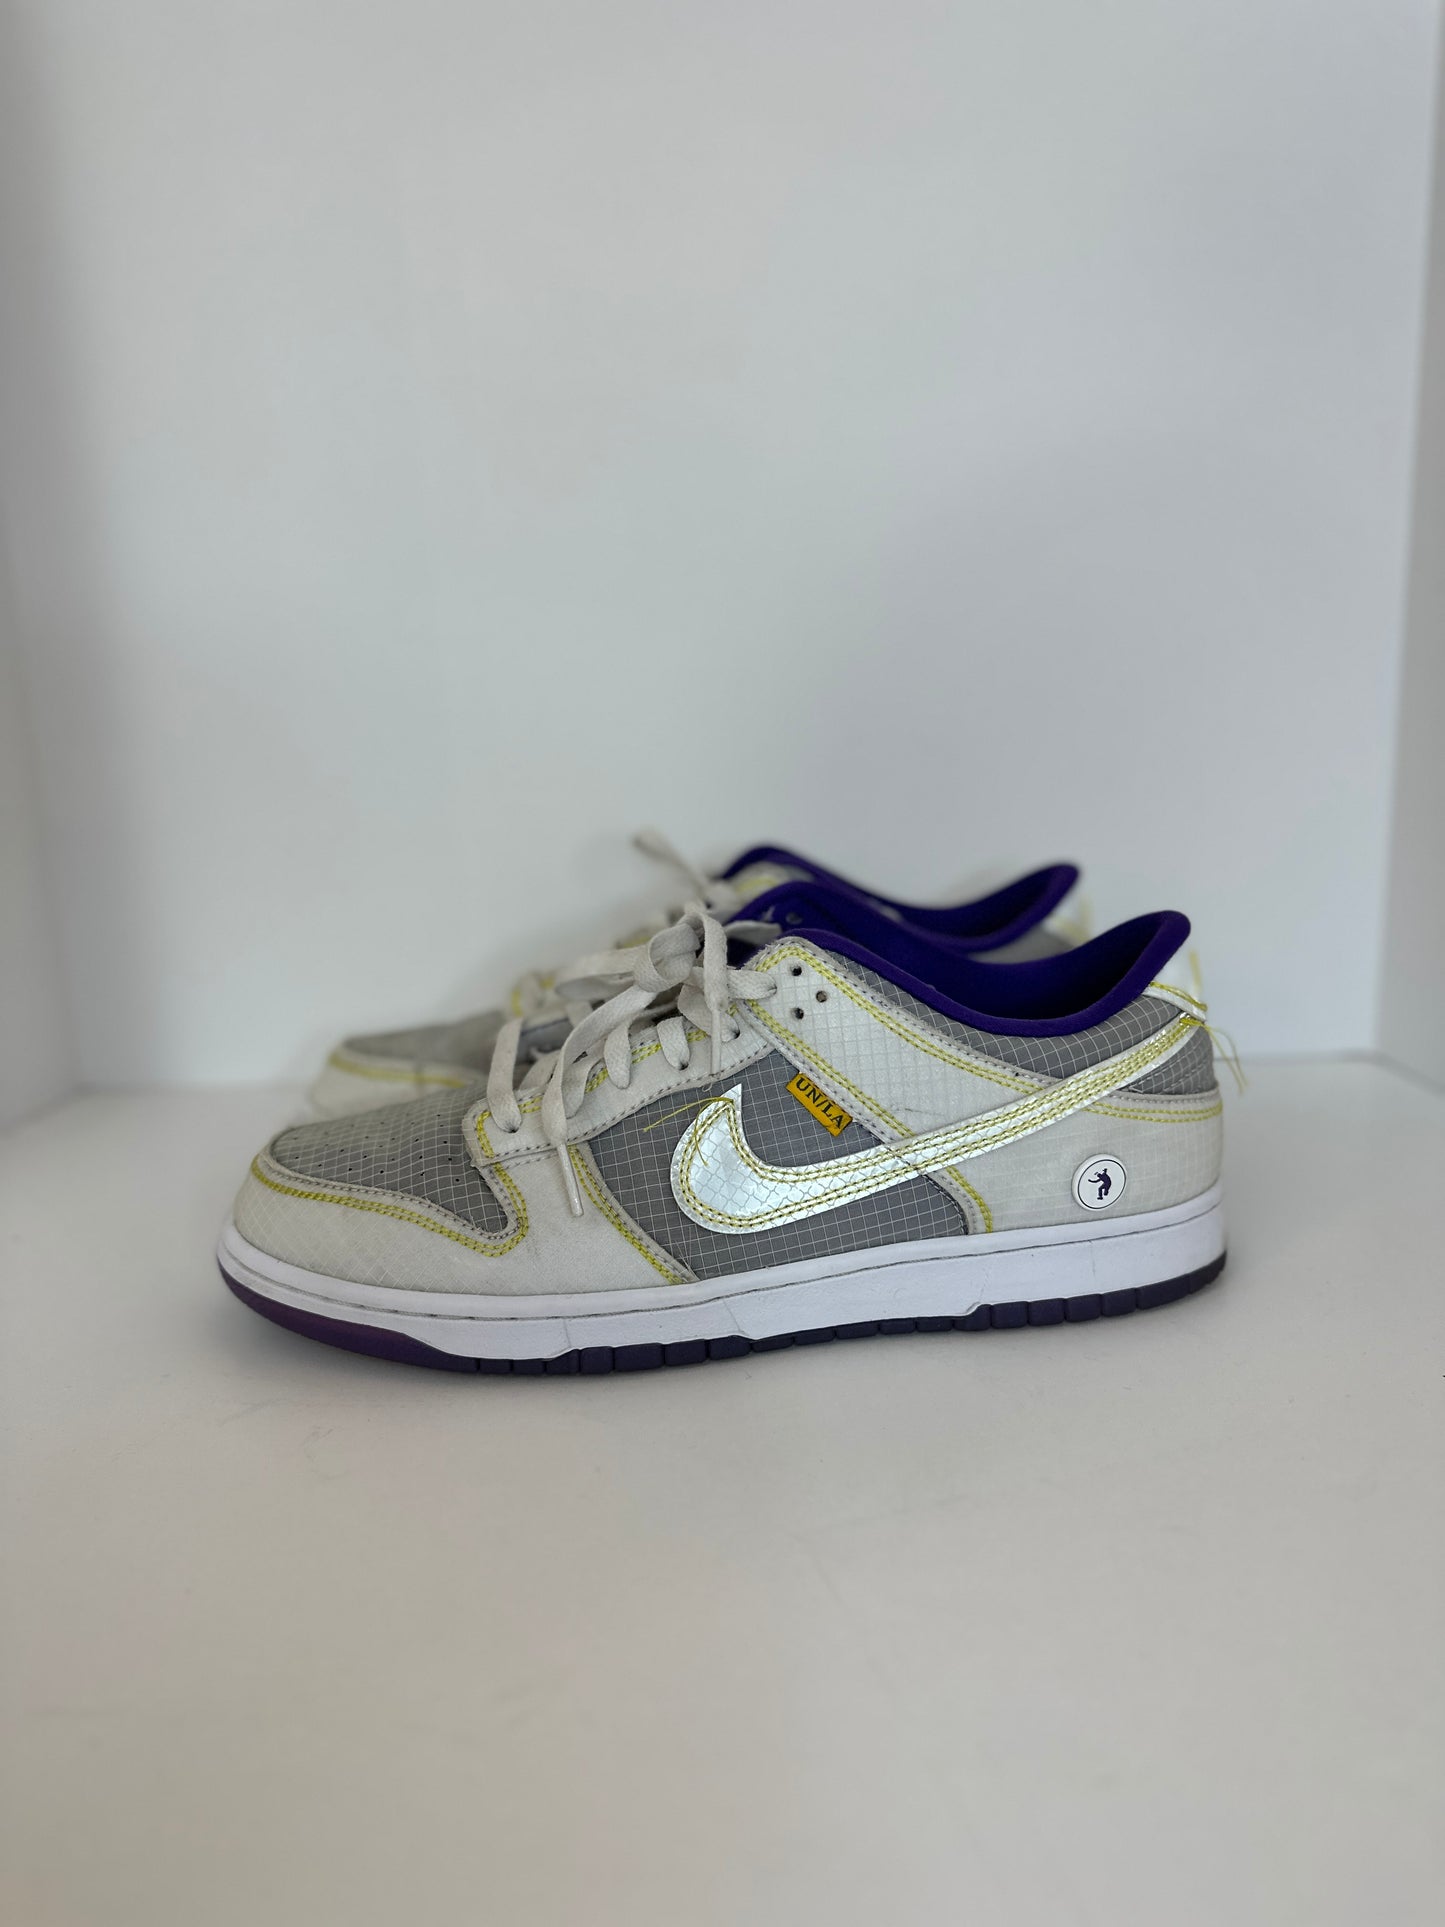 Nike Dunk Low Union Passport Pack Court Purple Size 11.5 Used